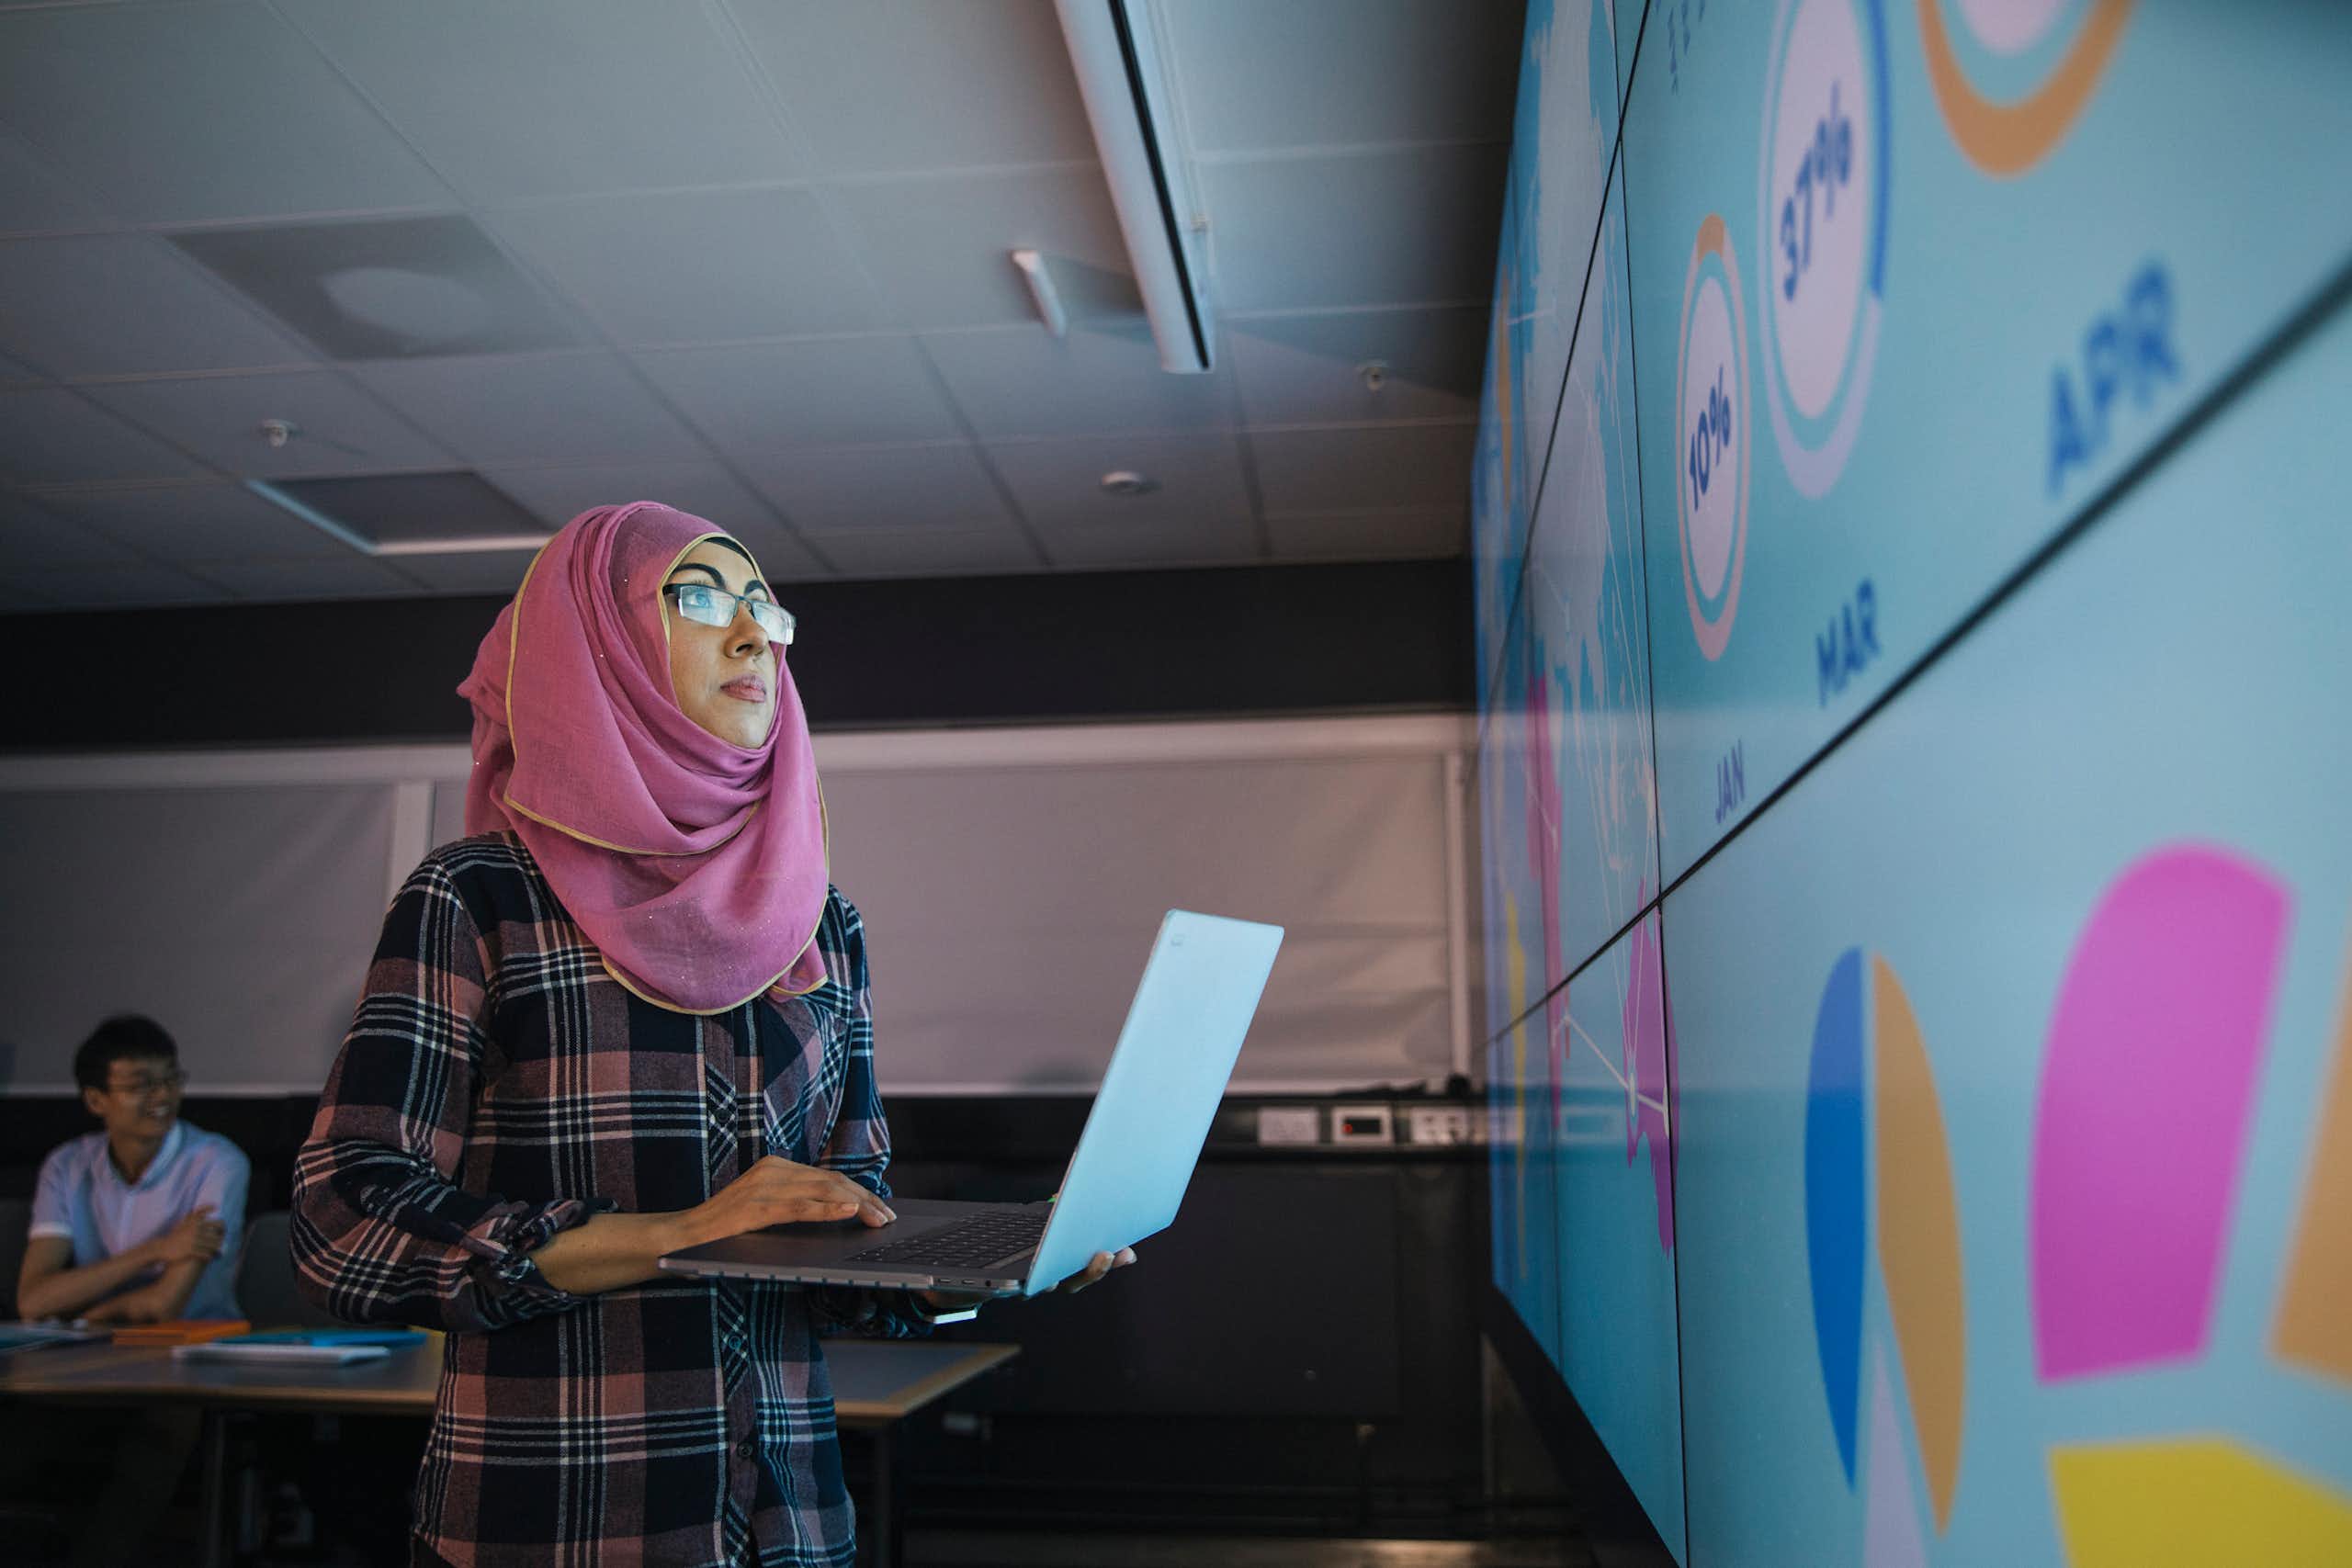 A young woman who is wearing a hijab uses a laptop to program an information wall for a presentation with colleagues.